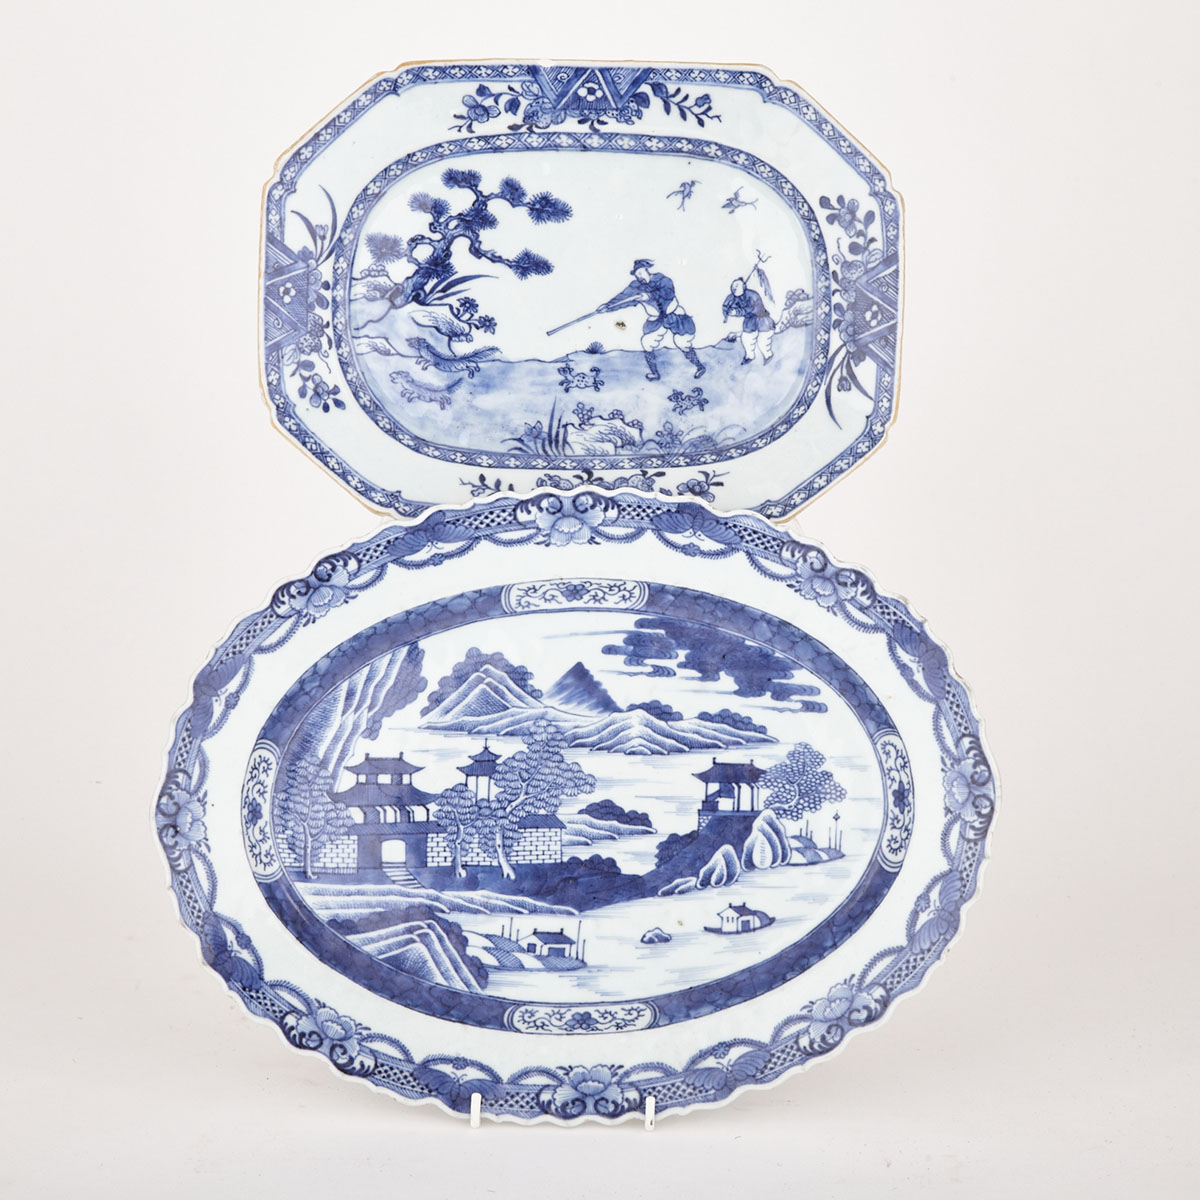 Two Export Blue and White Platters, 18th/19th Century